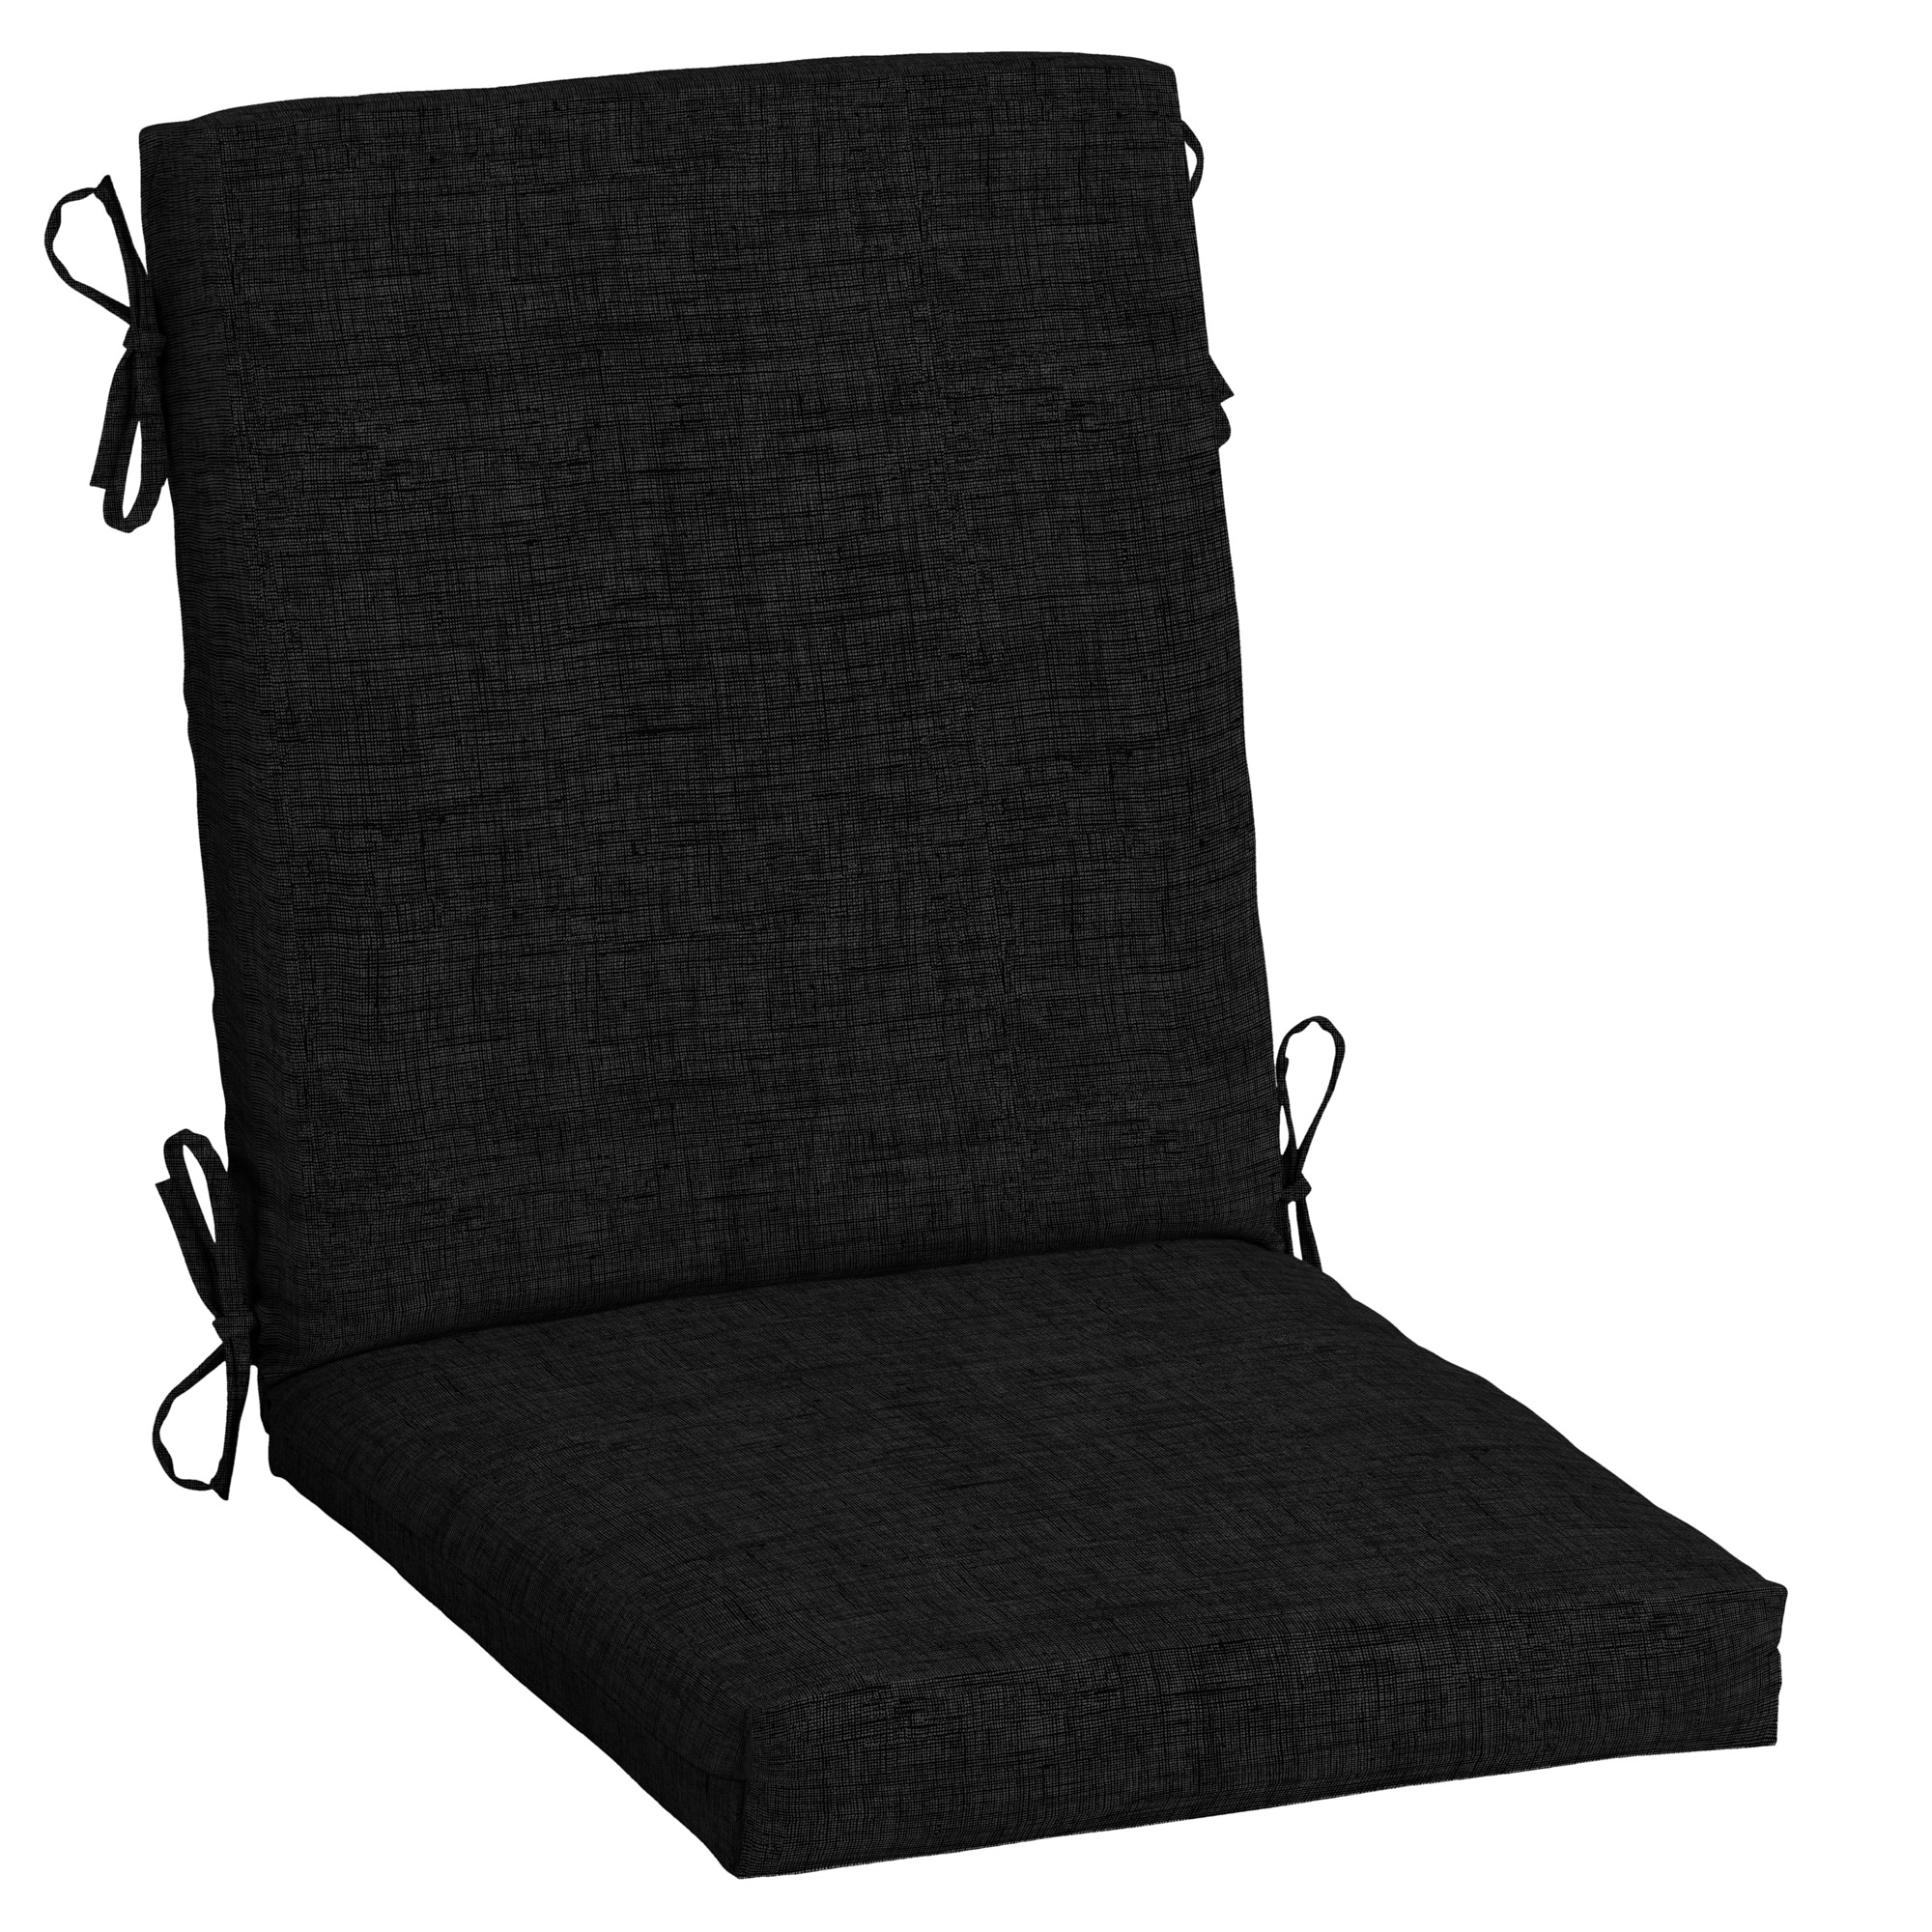 20-inch by 19-inch Polyester Chair Cushion Black Set of Four 